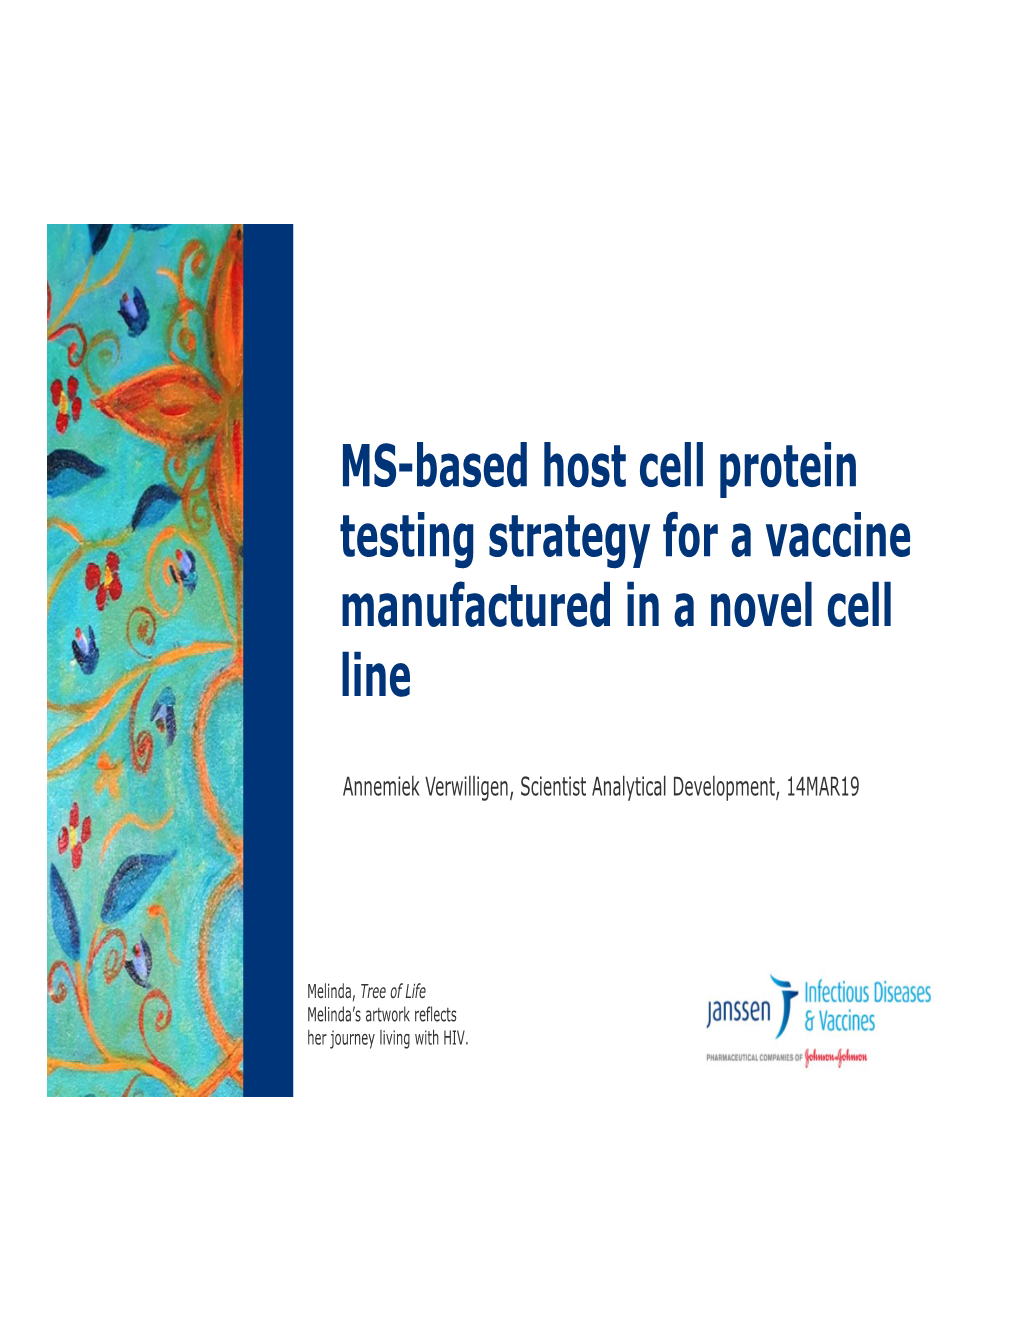 MS-Based Host Cell Protein Testing Strategy for a Vaccine Manufactured in a Novel Cell Line